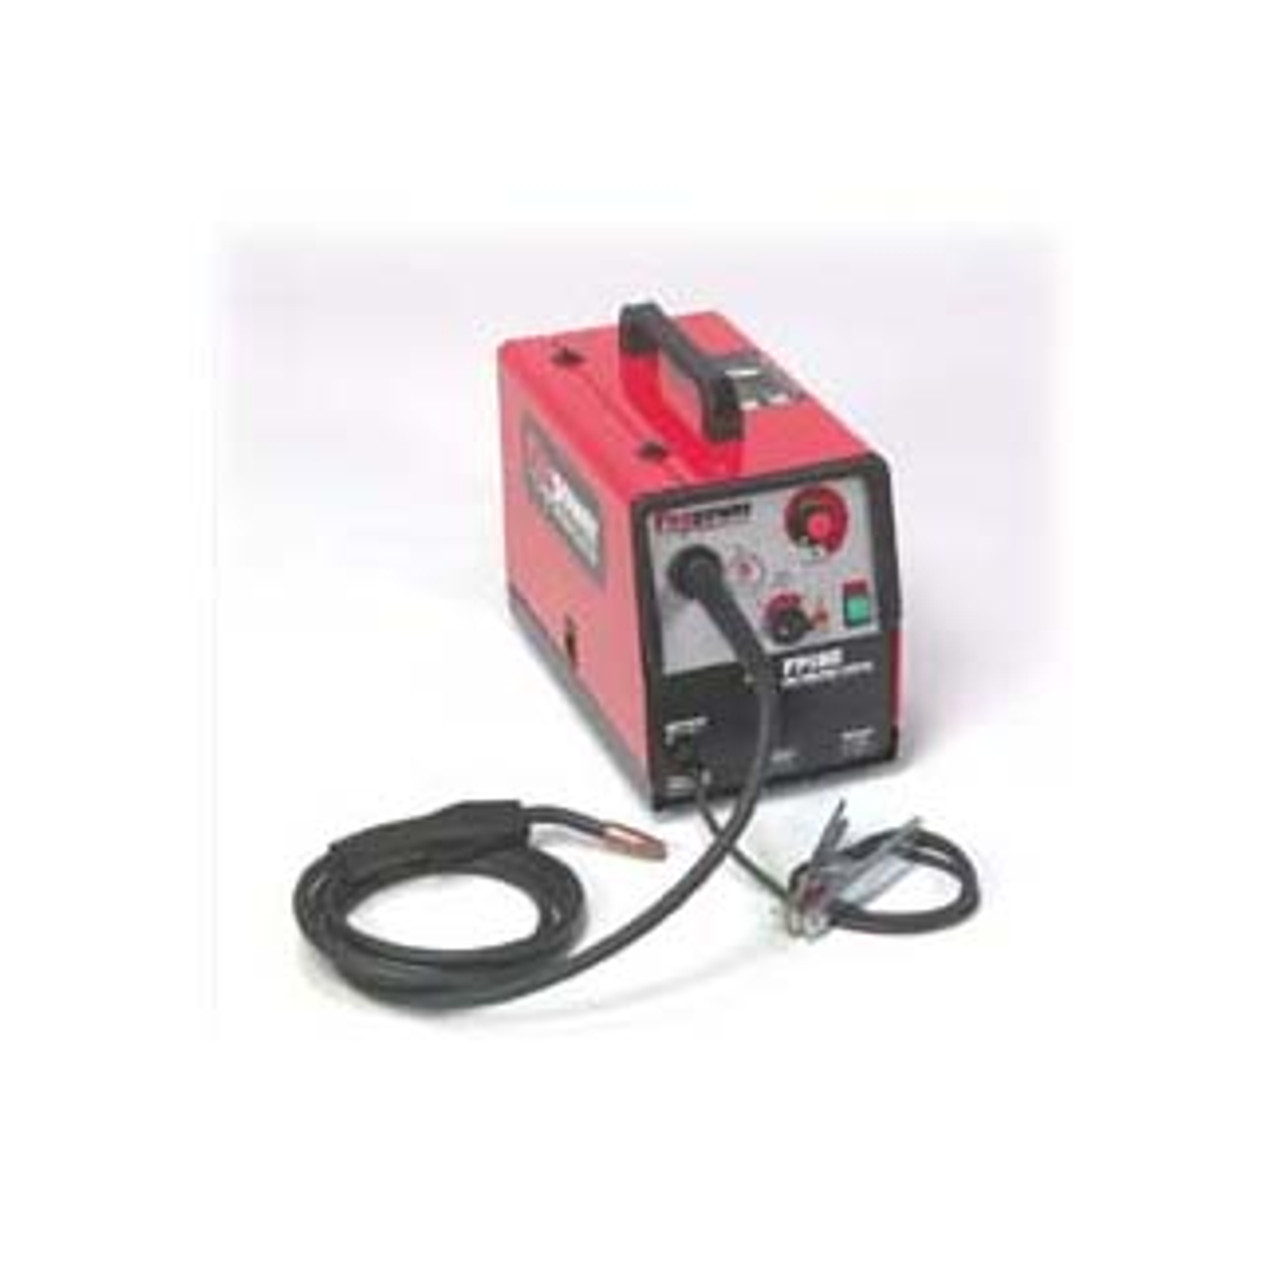 FP-130 and FP-160 Mig Welding System